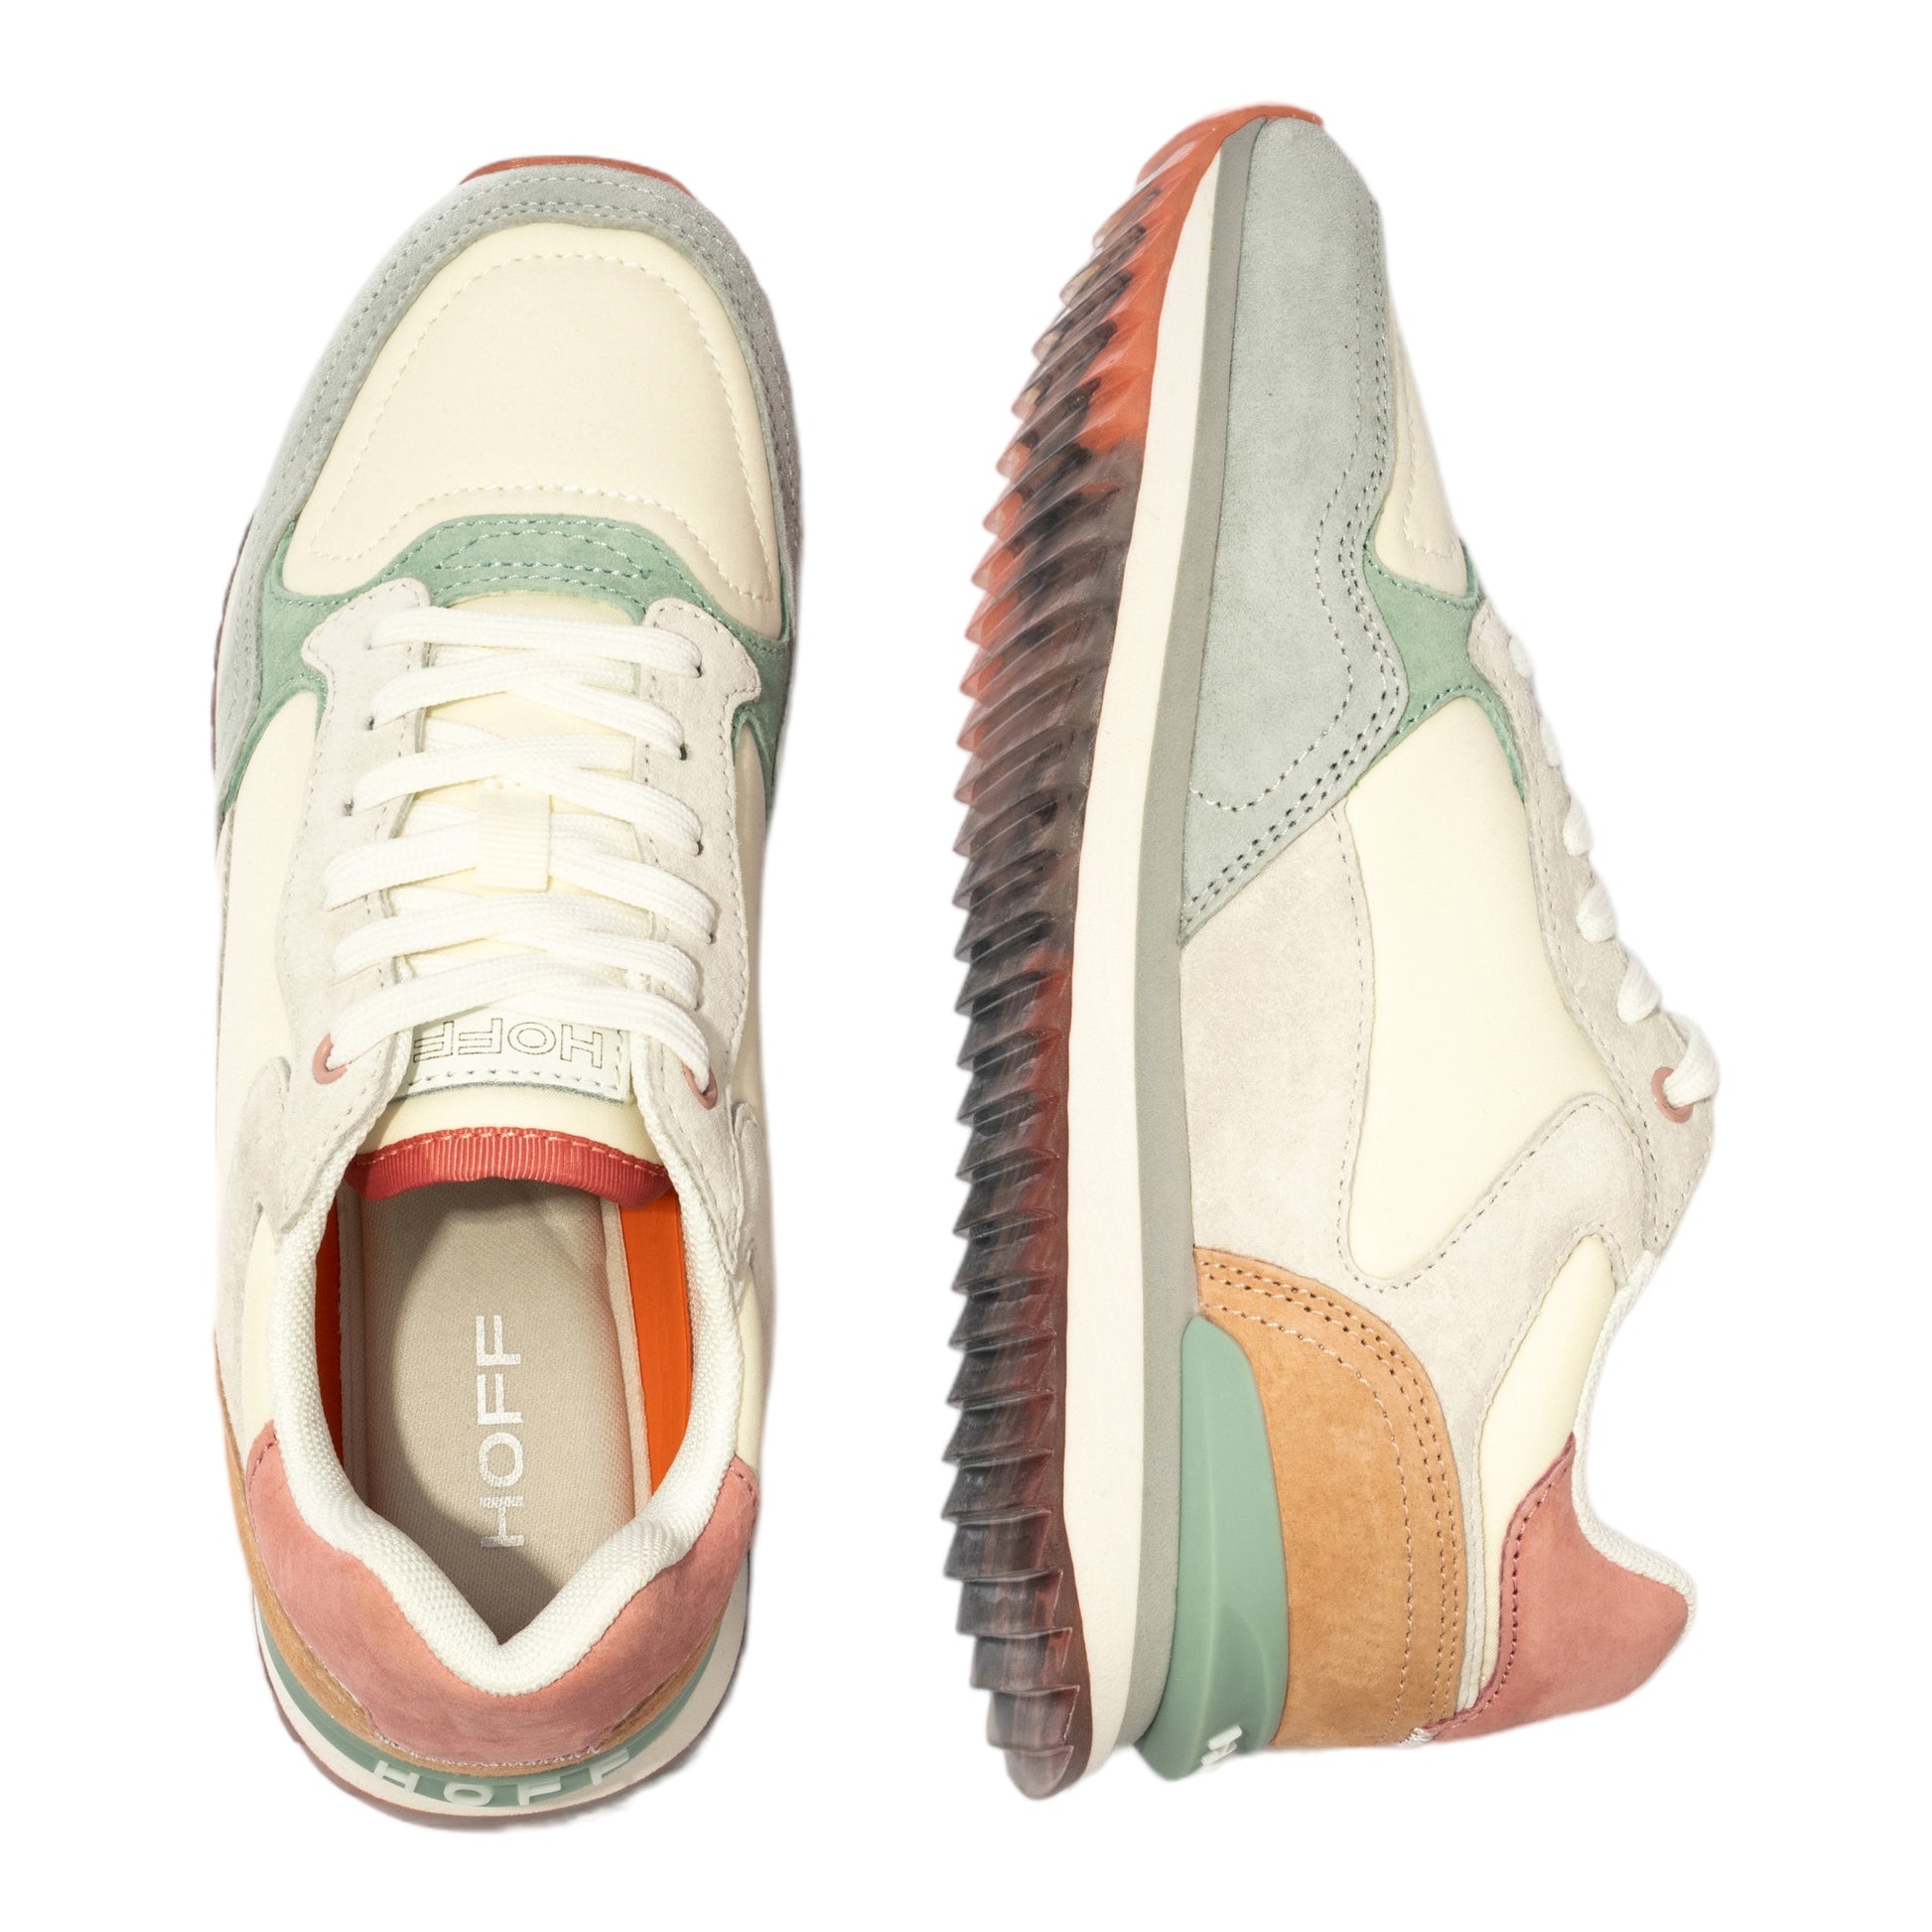 Conker Boutique Hoff Rome Multi Pastel Trainers - Top and side view